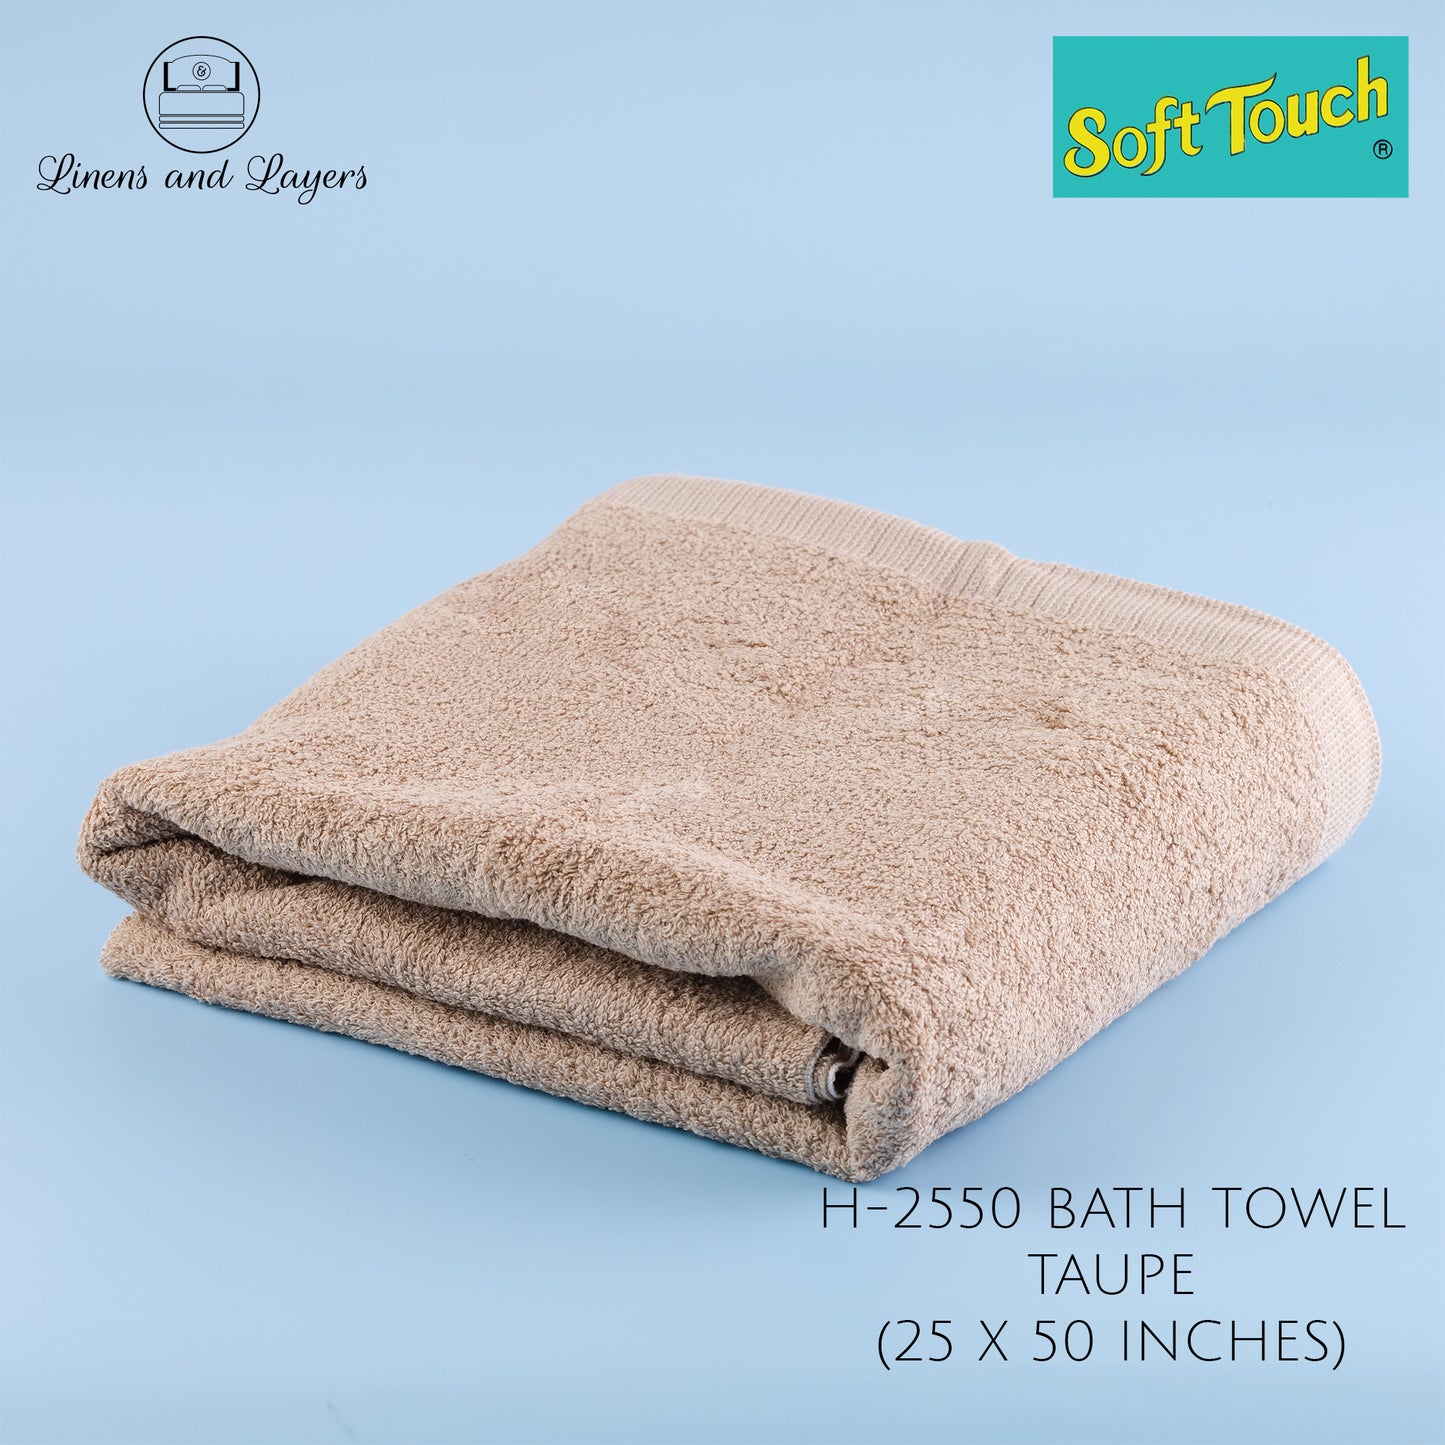 Soft Touch Bath Towel (409 GSM) - H-2550 Terrycloth - 25x50 inches